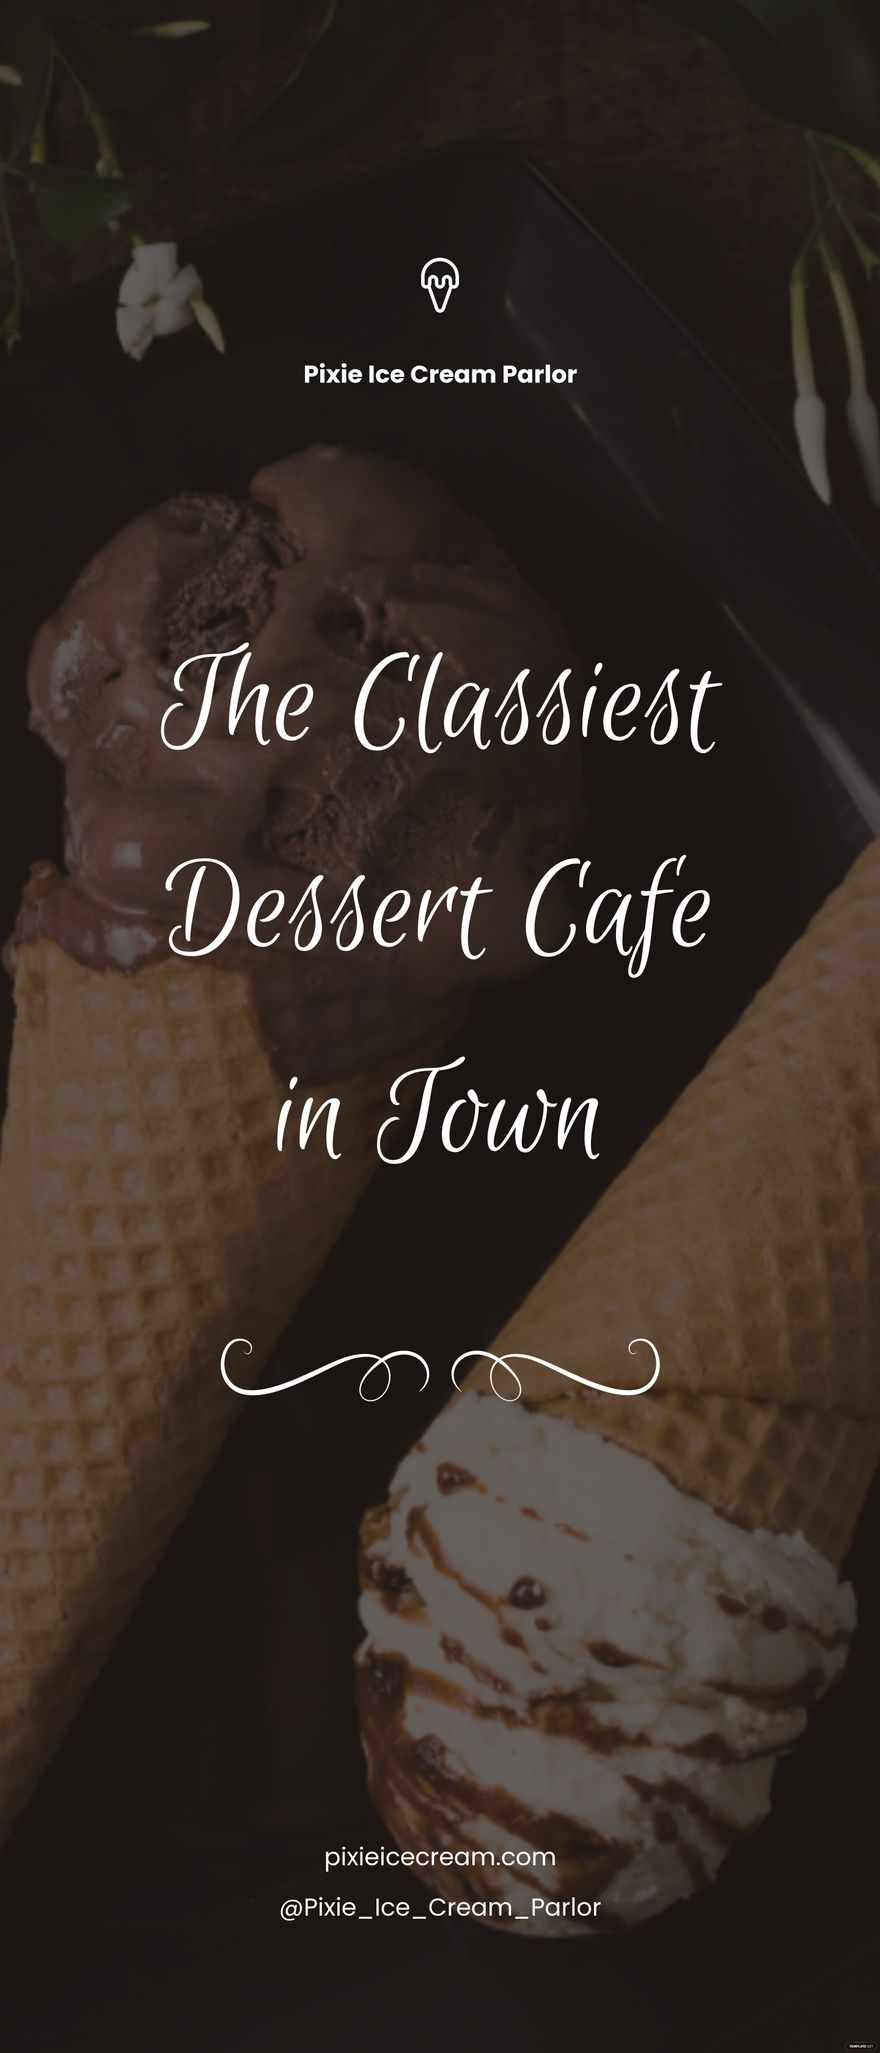 Ice Cream Store Roll Up Banner Template